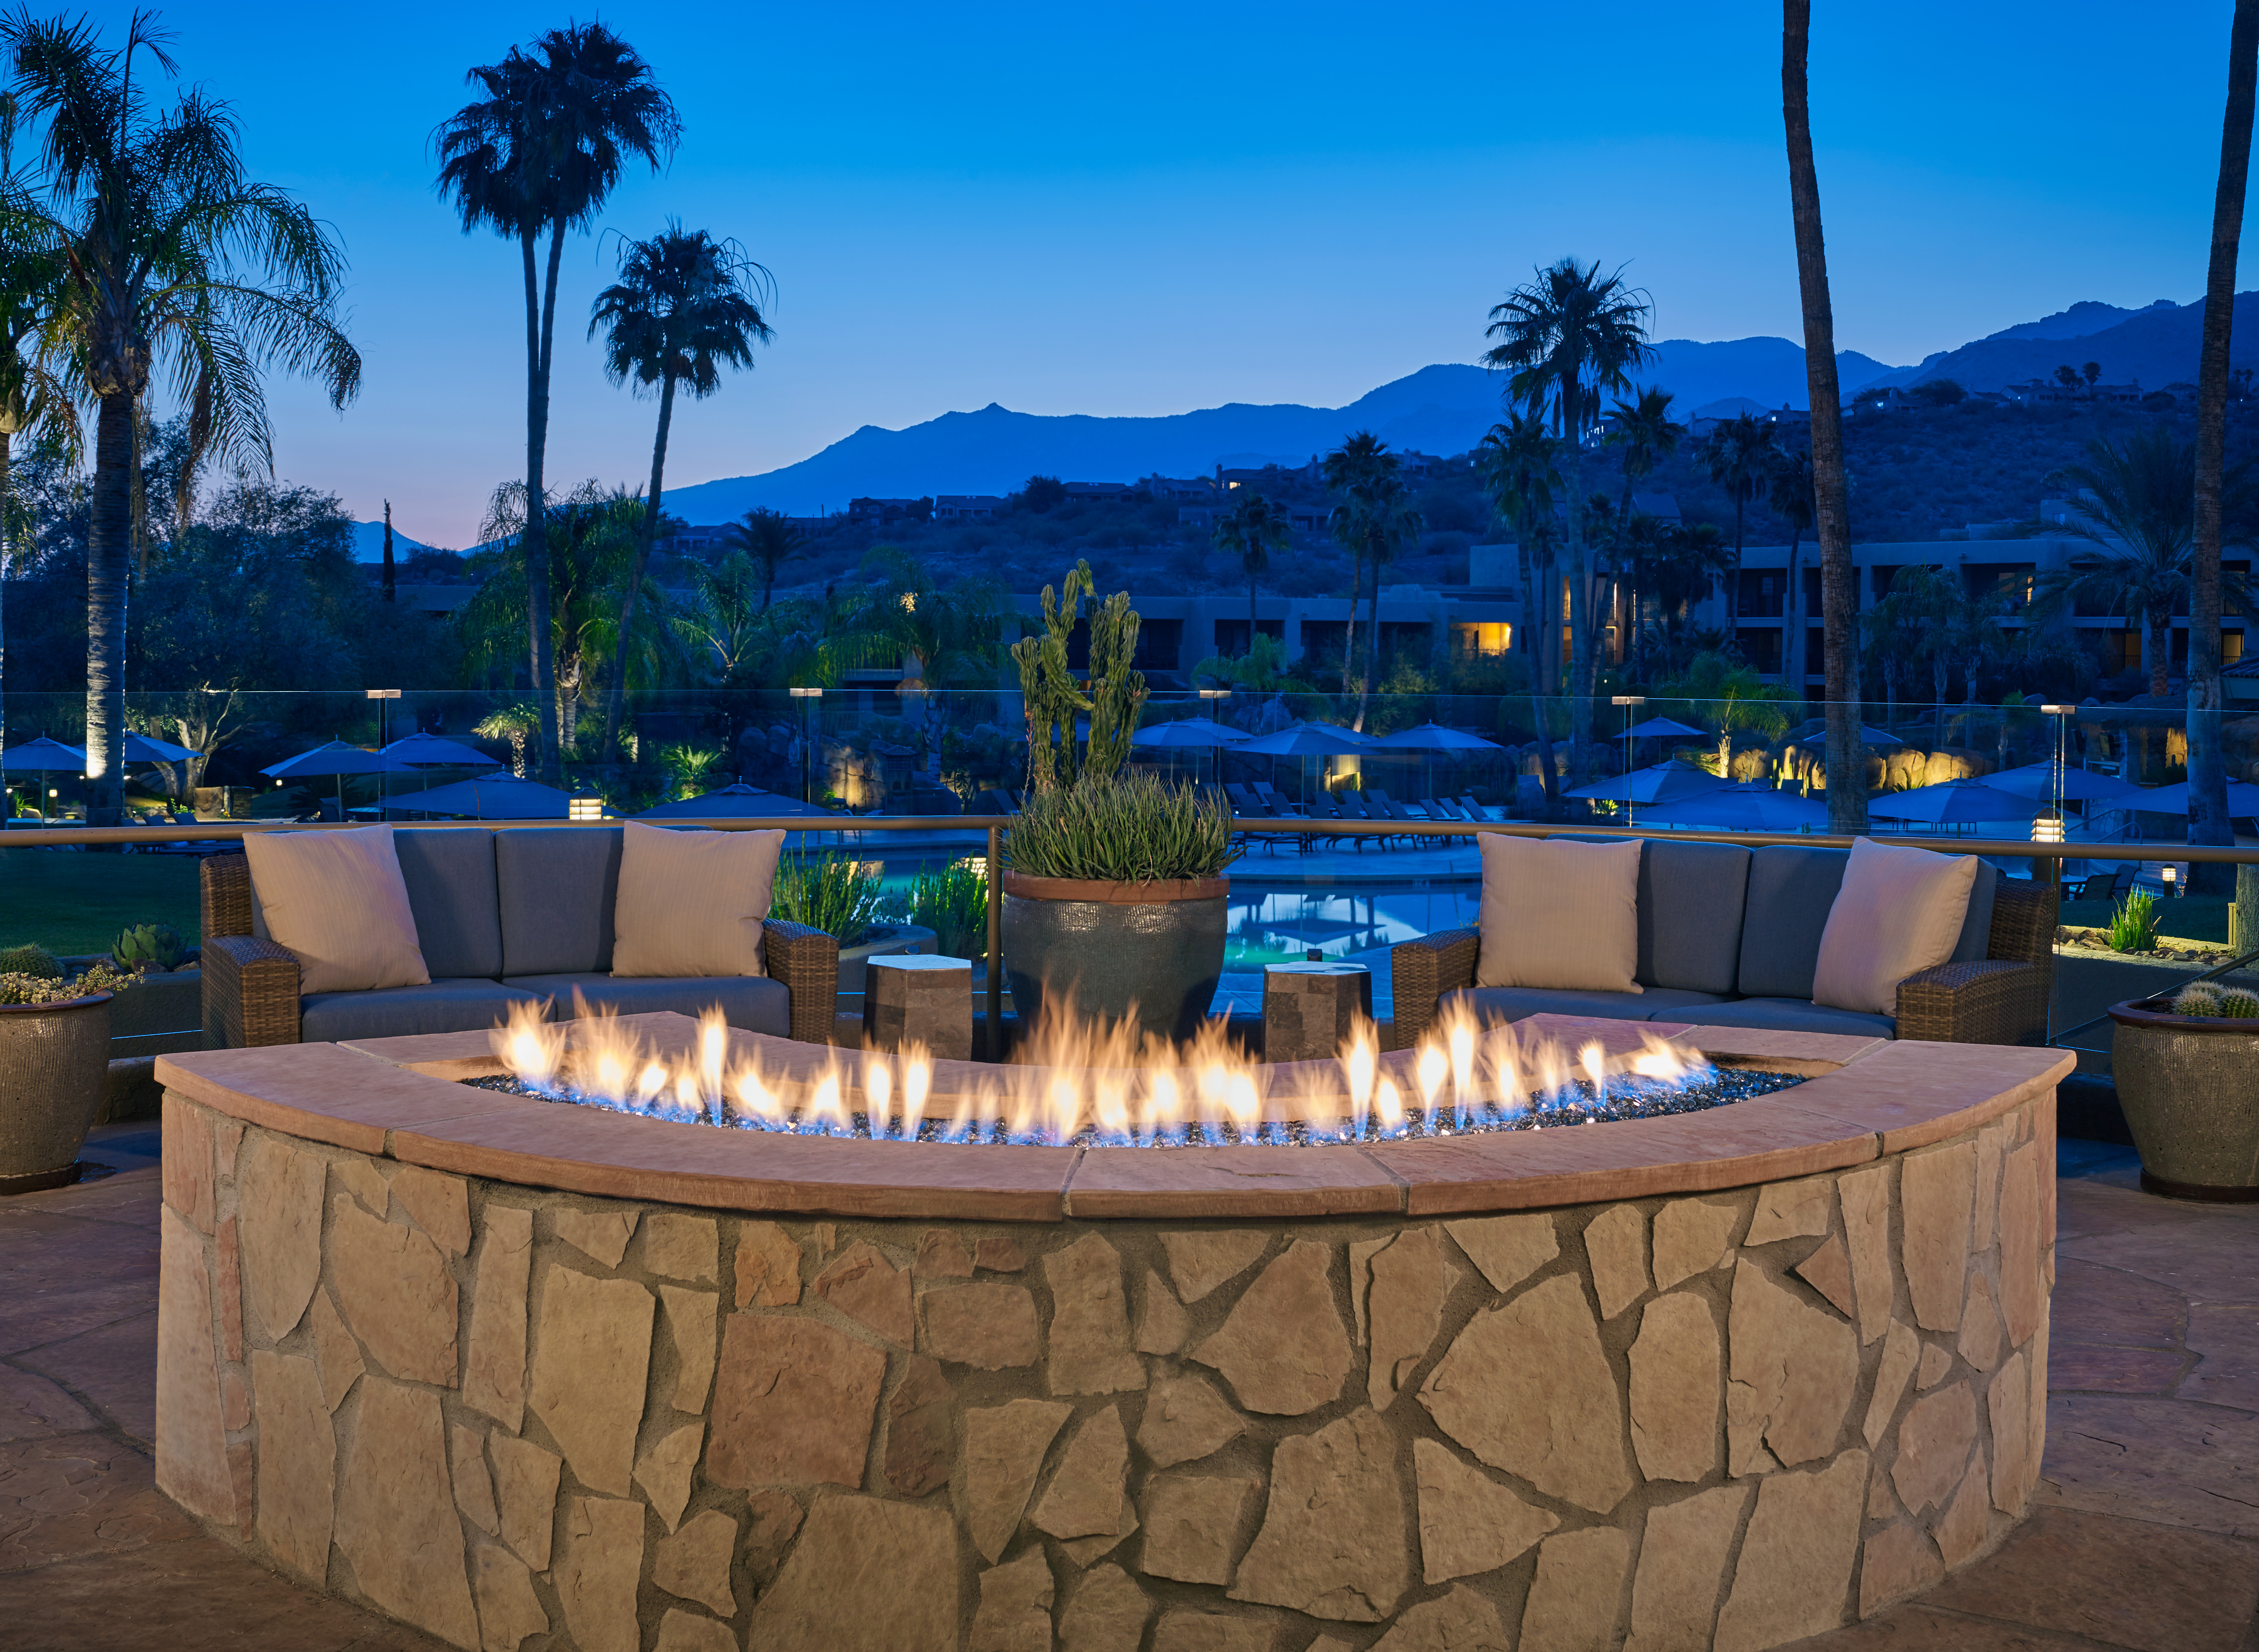 Sunset View of Firepit on Patio with Lounge Chairs and Mountains in the Background